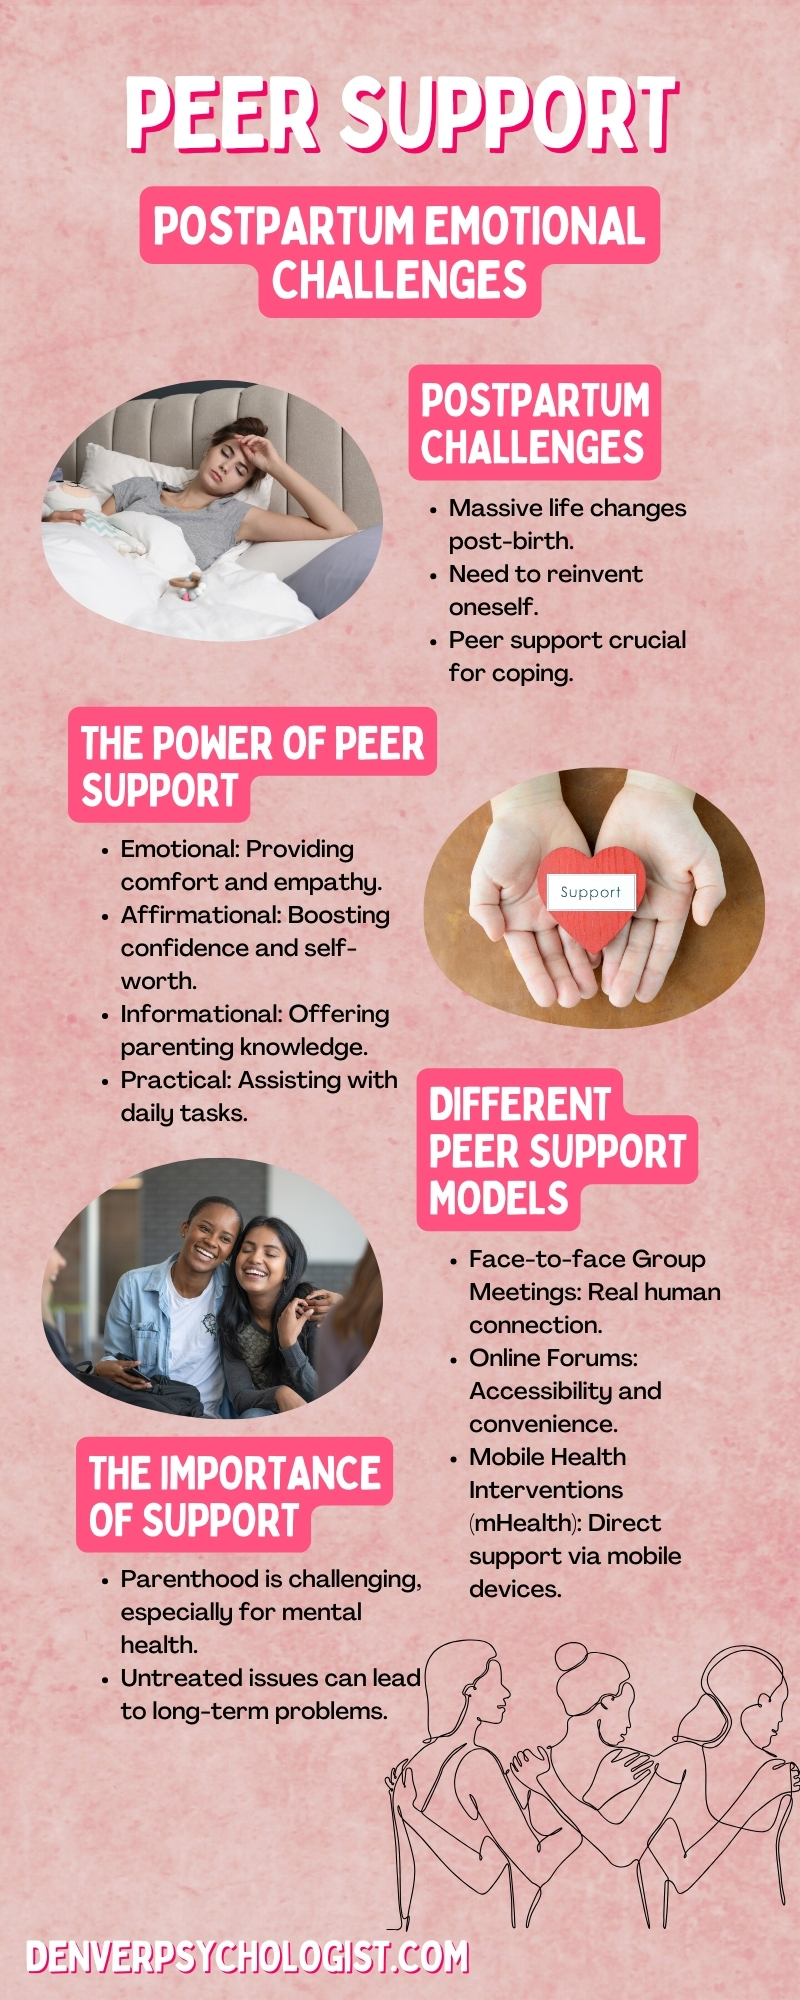 Peer Support and Postpartum Emotional Challenges Infographic